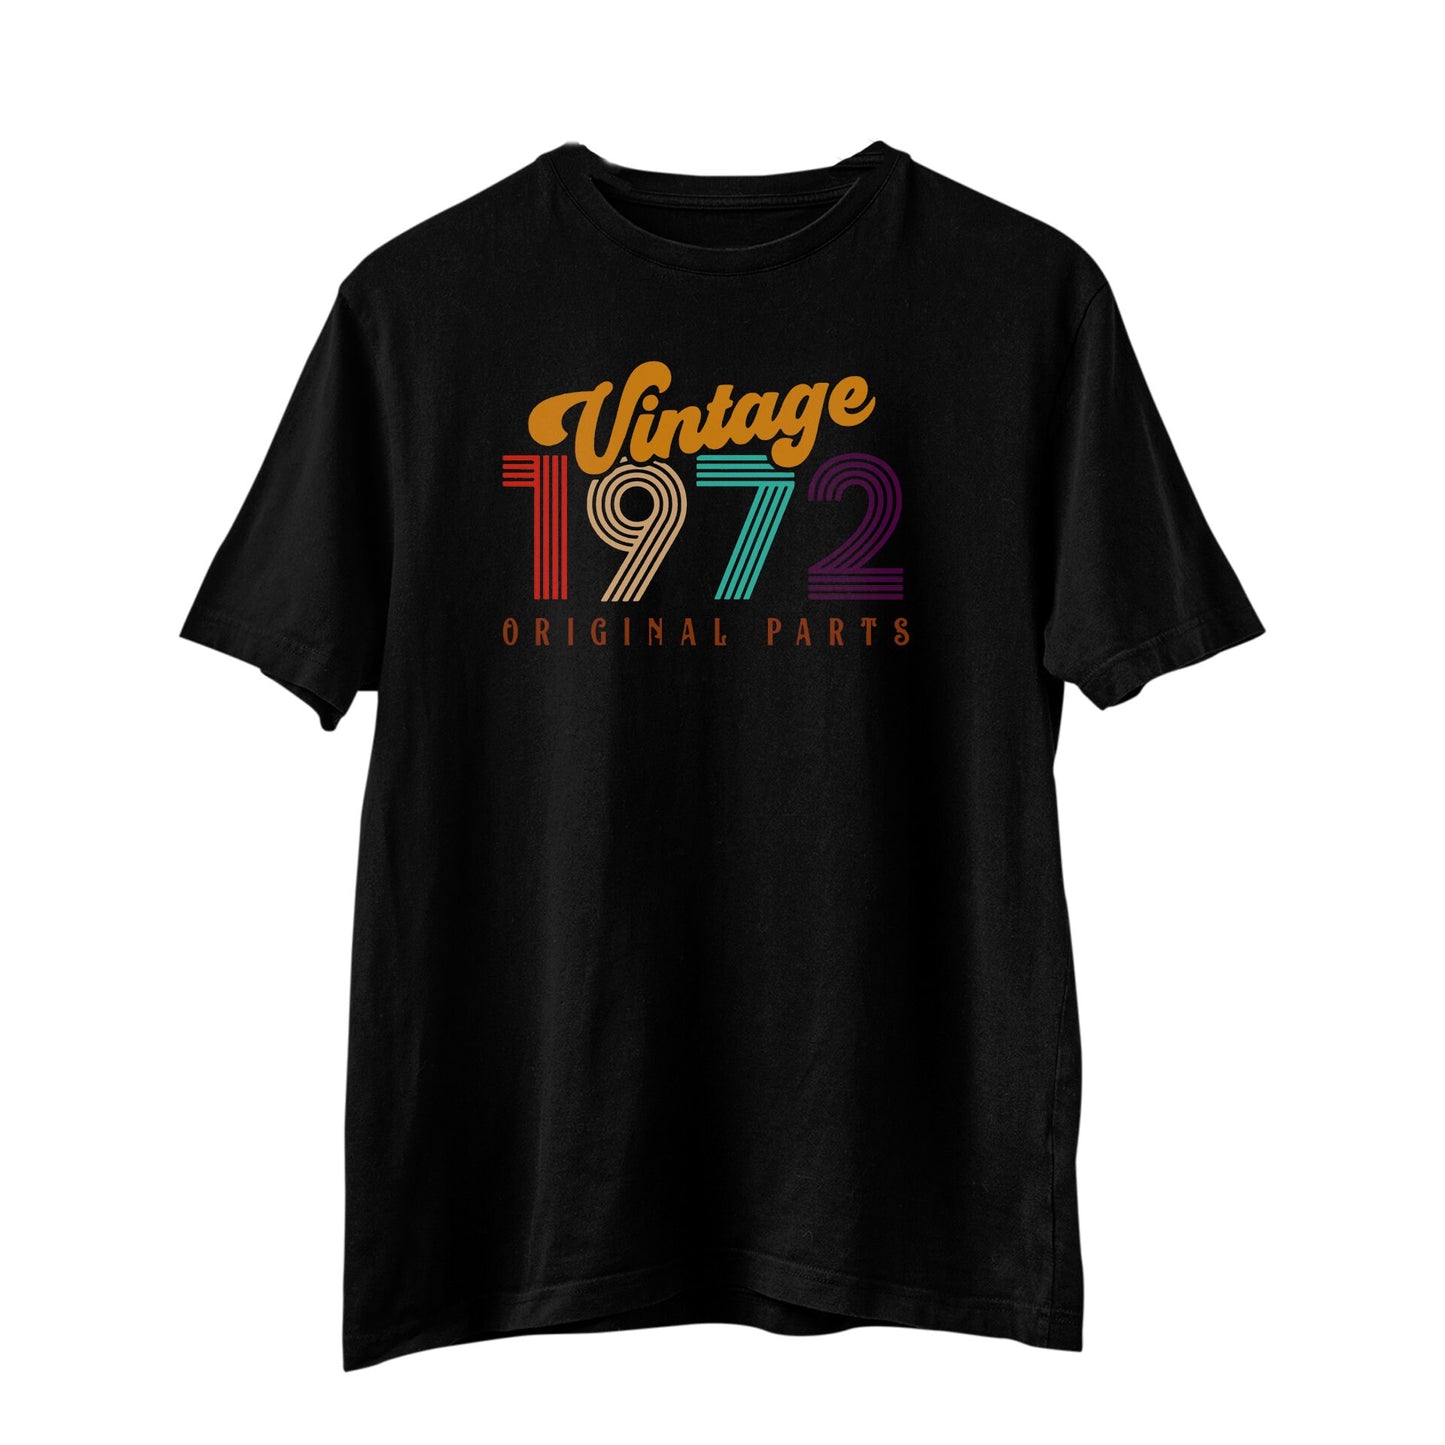 Vintage 1972 T-Shirt, 50th Birthday T Shirt, 1972 Birthday Gift,  50th Birthday Gift , Party 50 Years Old Tee Limited Edition, Novelty Shirt